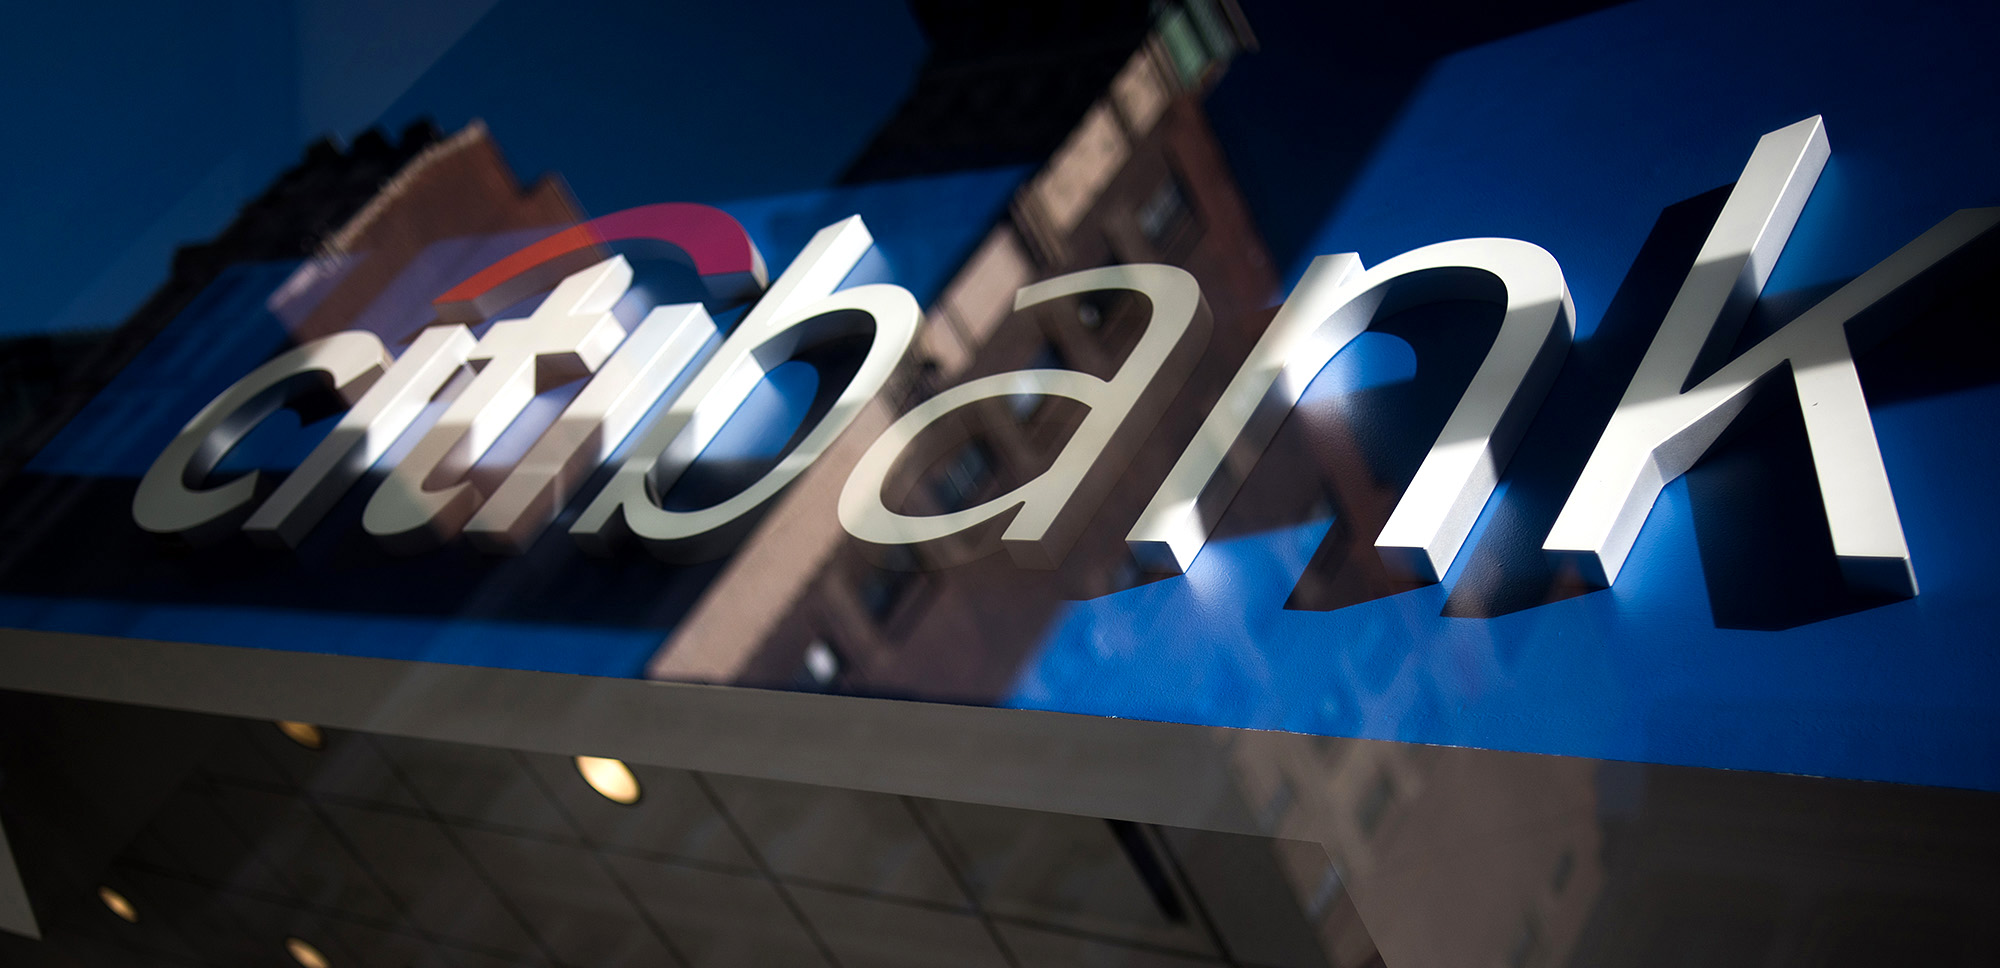 Citigroup Inc. signage is seen through the window of a bank branch in New York.